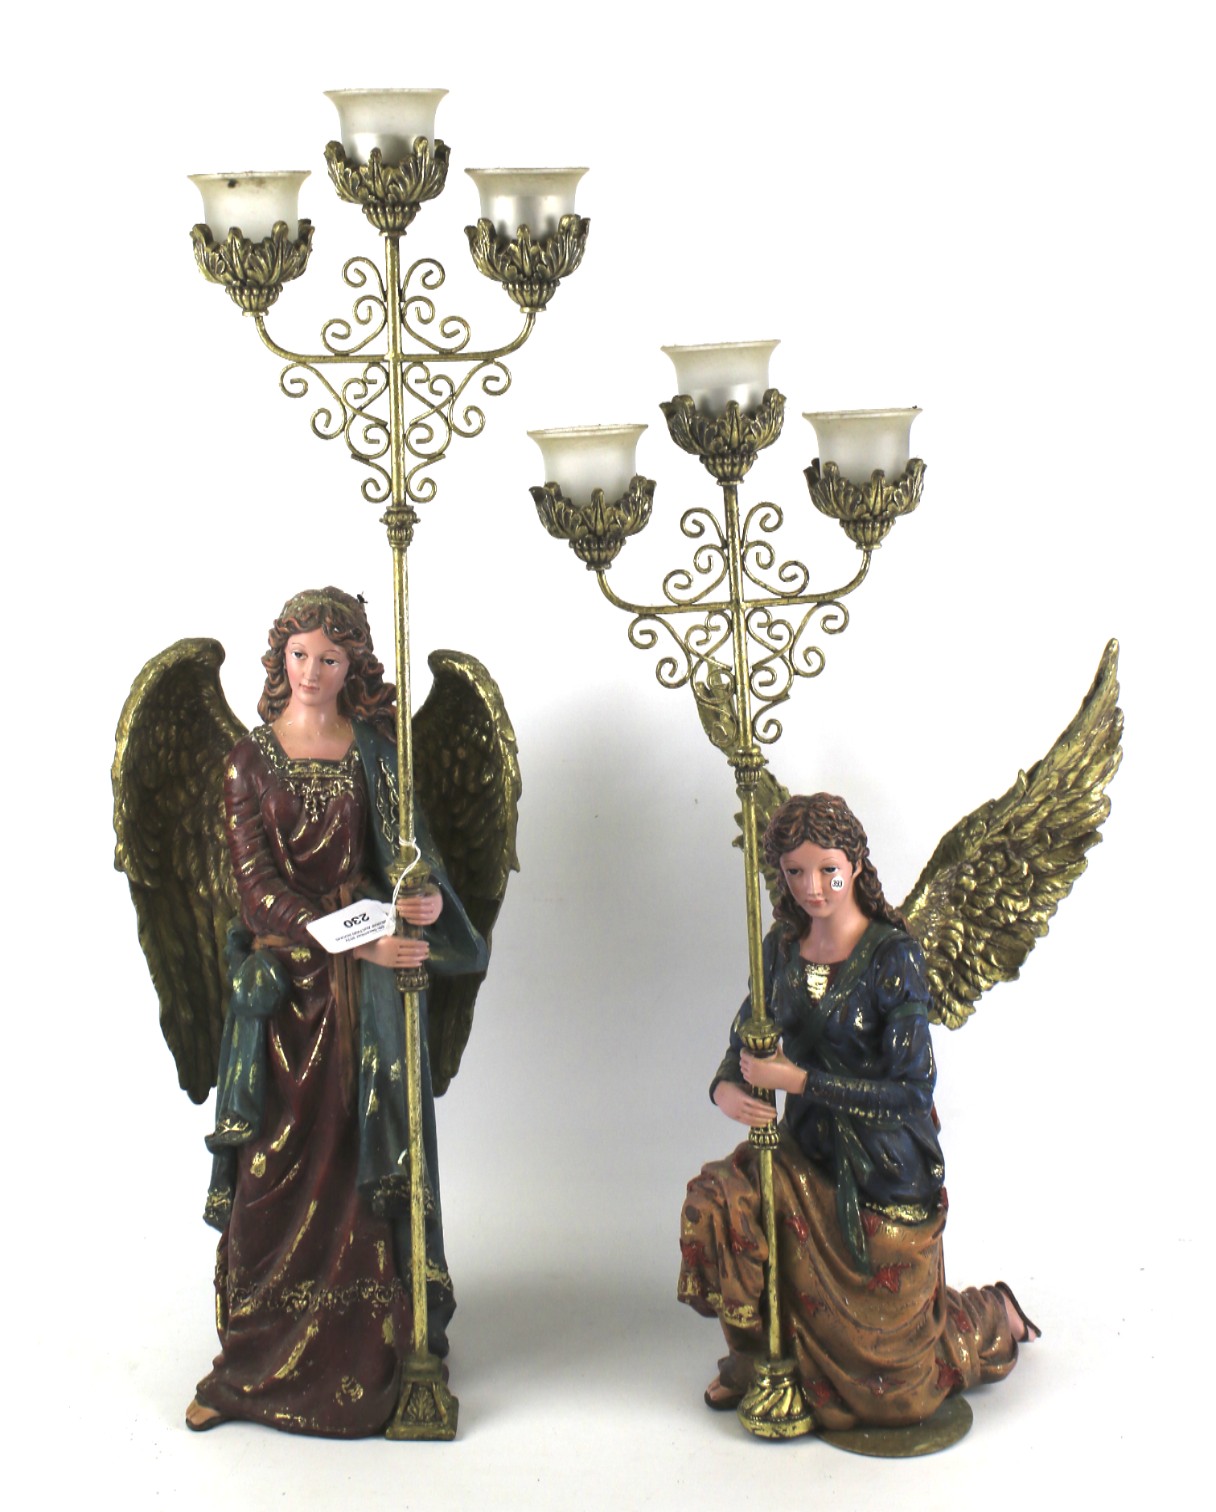 Two modern resin figures of angels, each holding three-pronged candelabras.